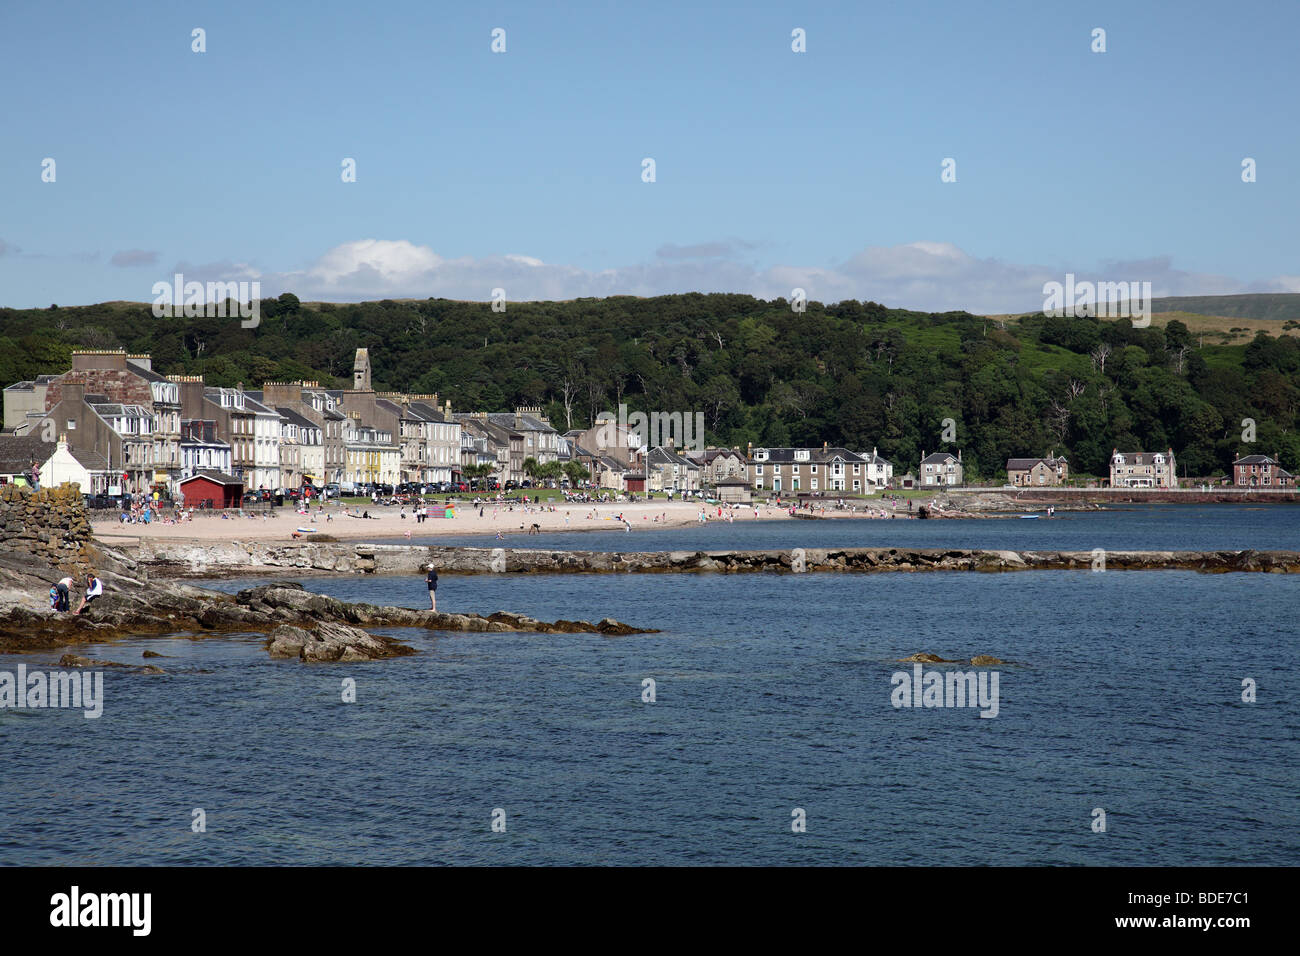 Looking across Newton Bay to Newton Beach in the town of Millport on the Island of Great Cumbrae in the Firth of Clyde, North Ayrshire, Scotland, UK Stock Photo